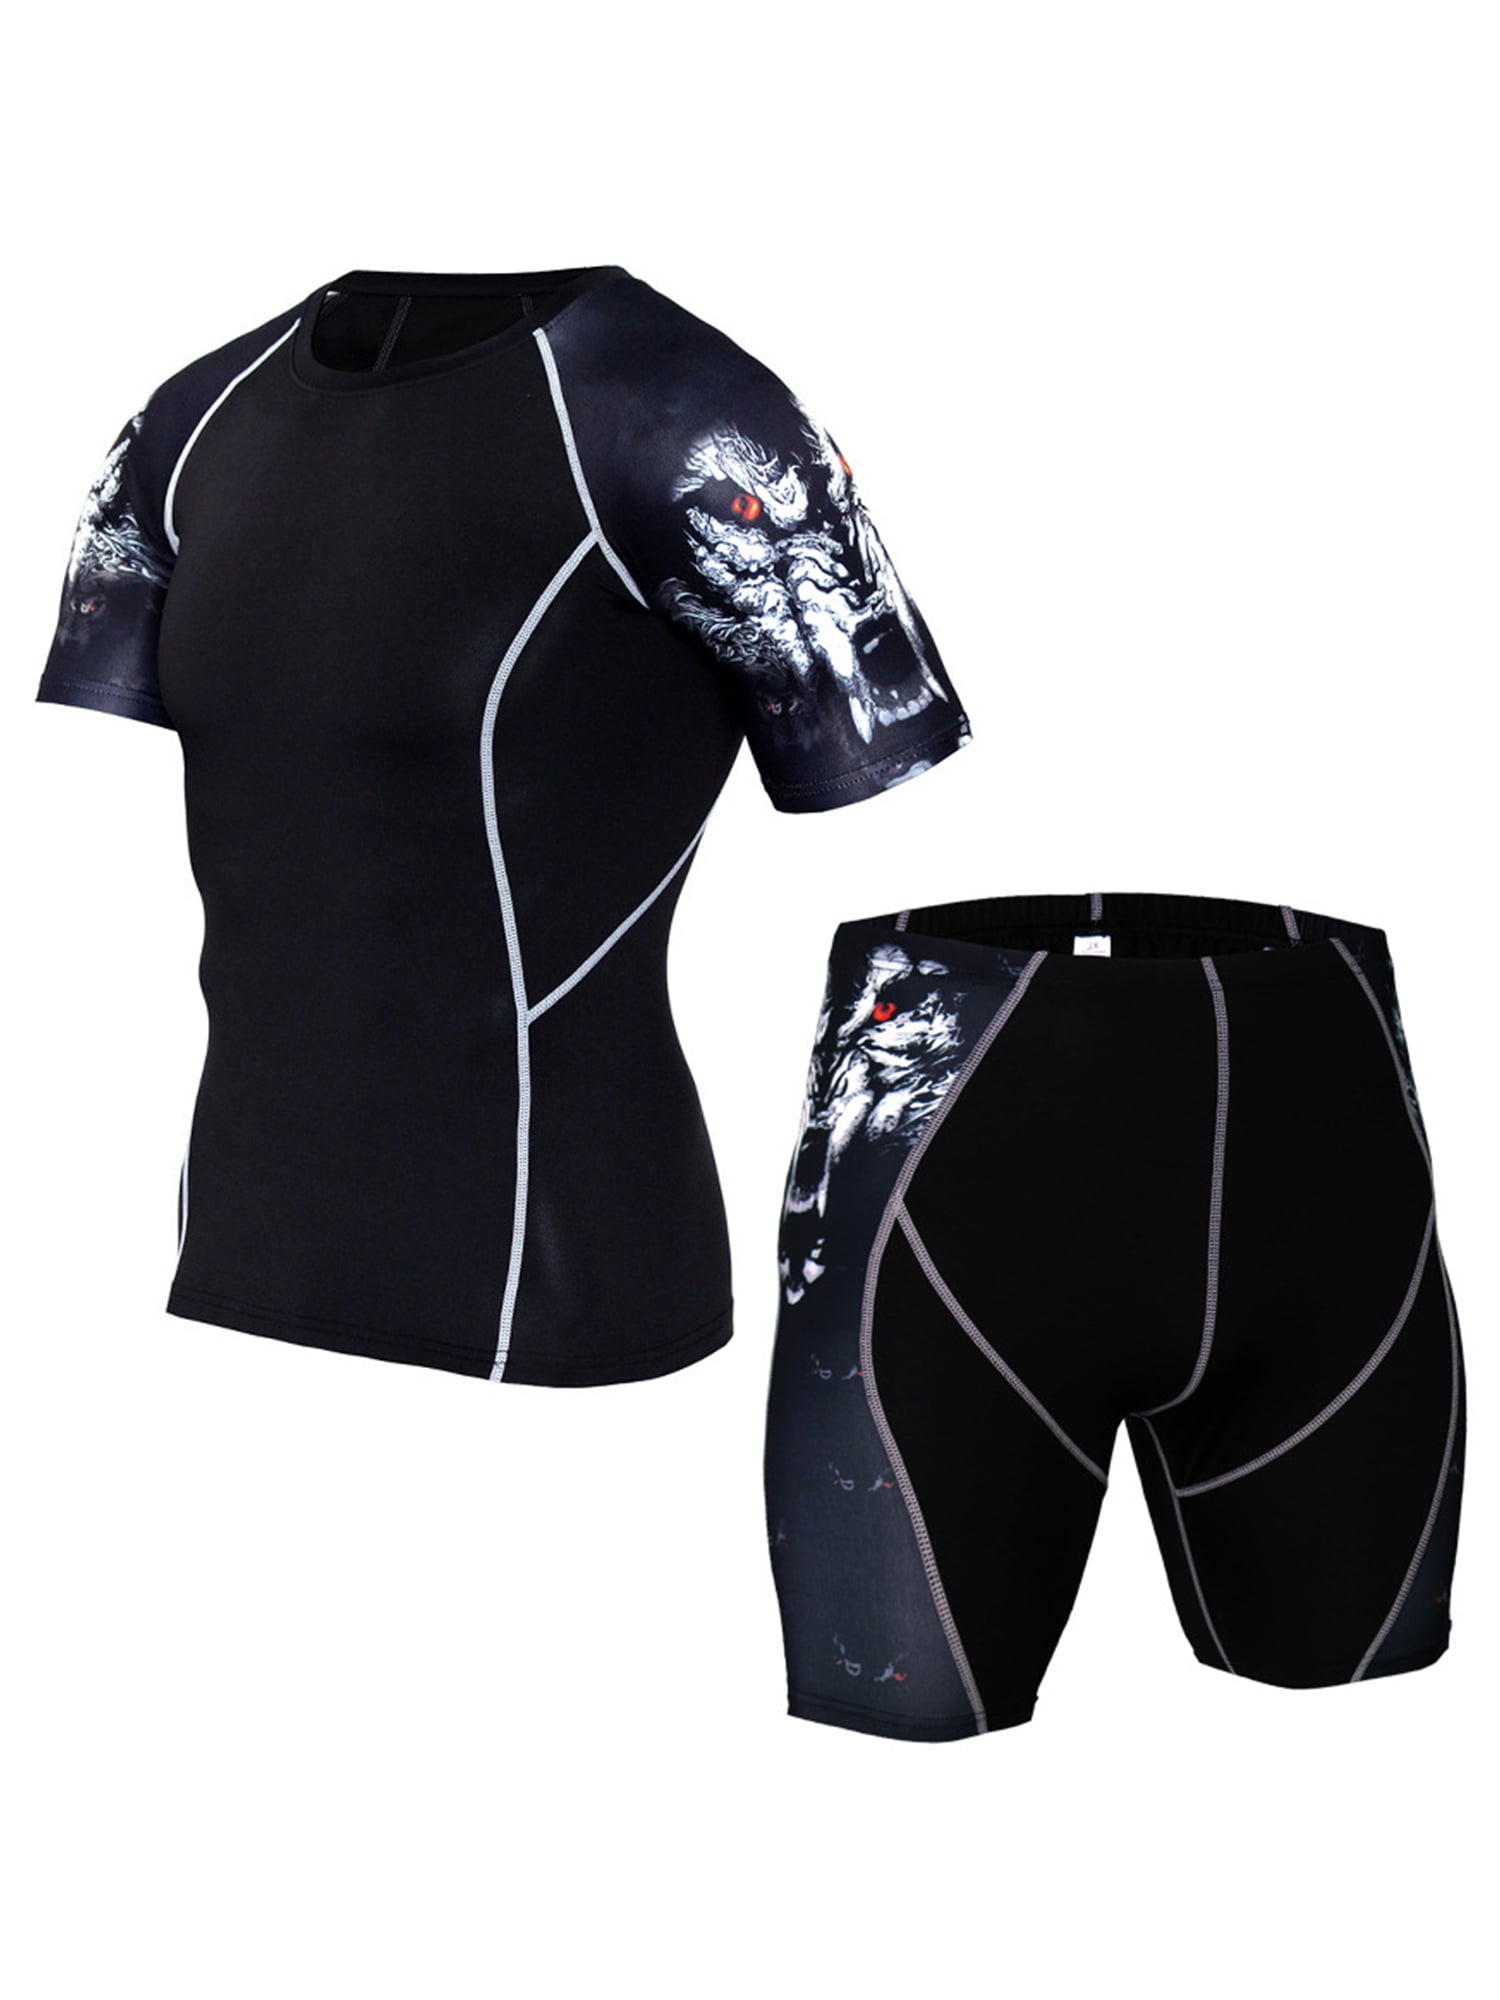 New Mens Compression Shirts Gym Workout Running Shorts Tight Printed